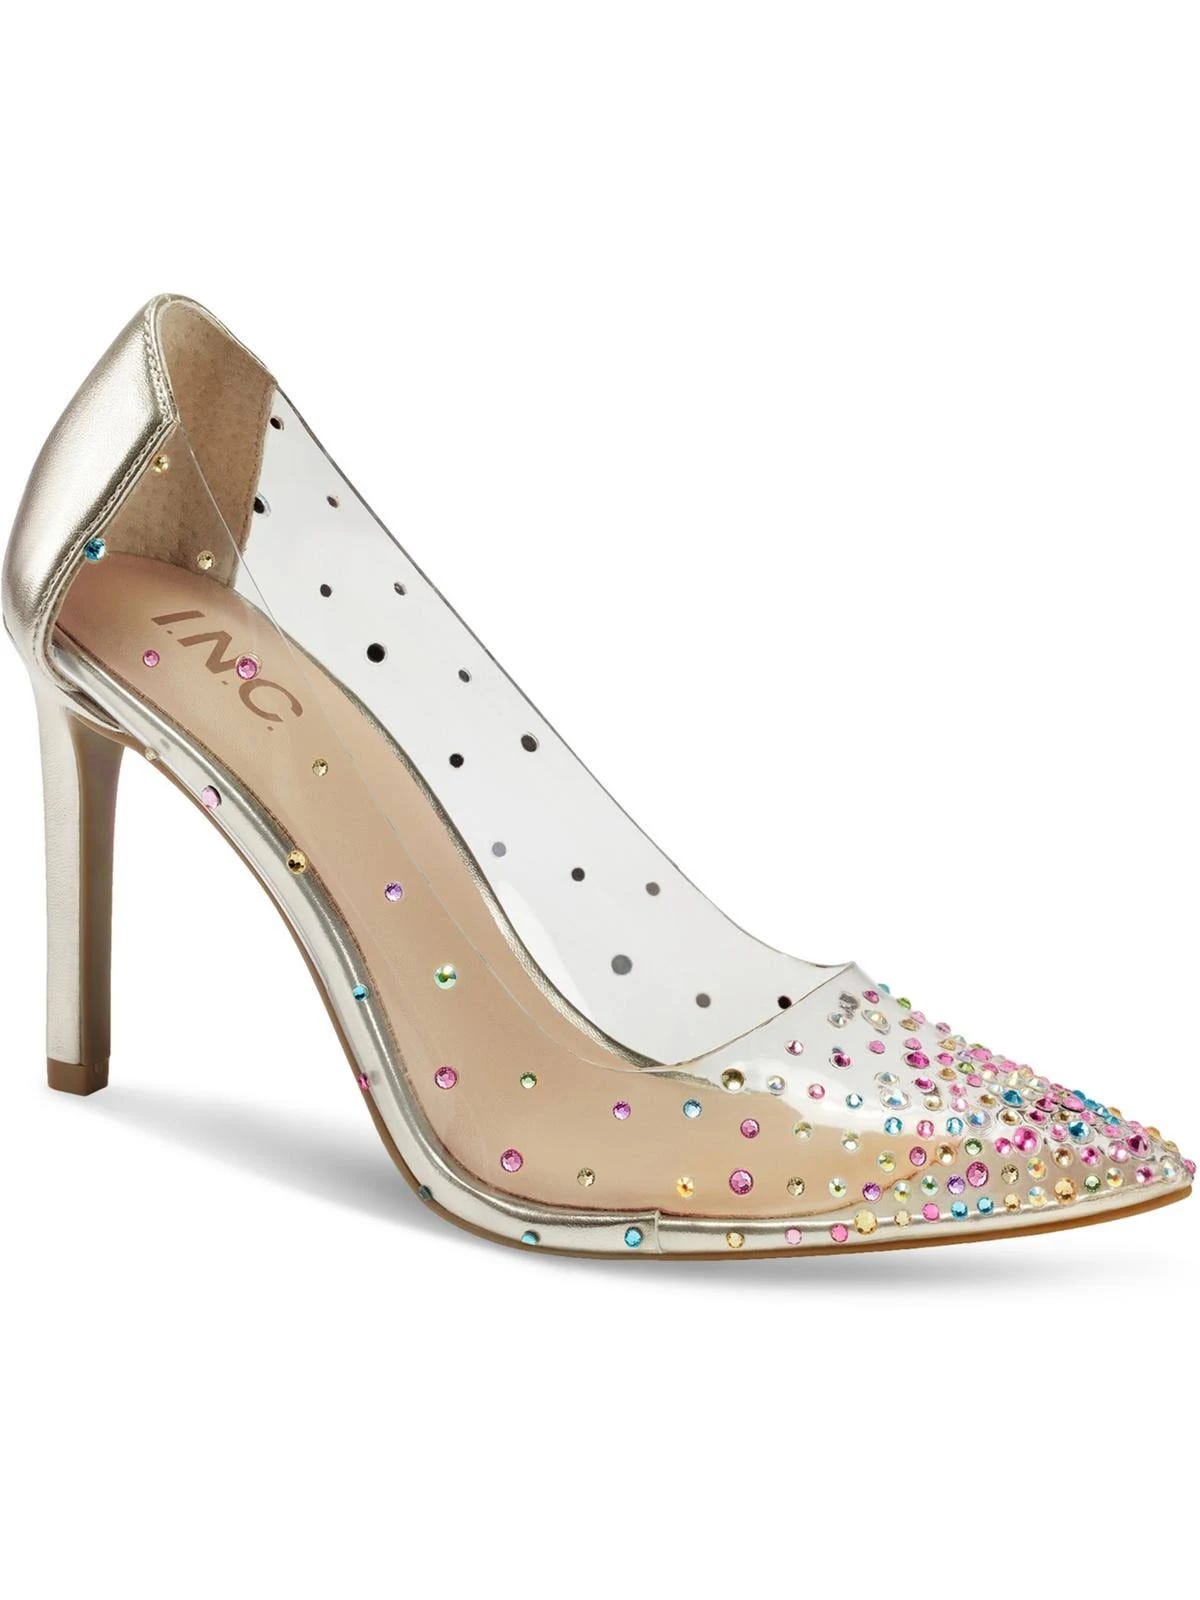 Clear Stiletto Pumps for Elegant Style and Versatility | Image